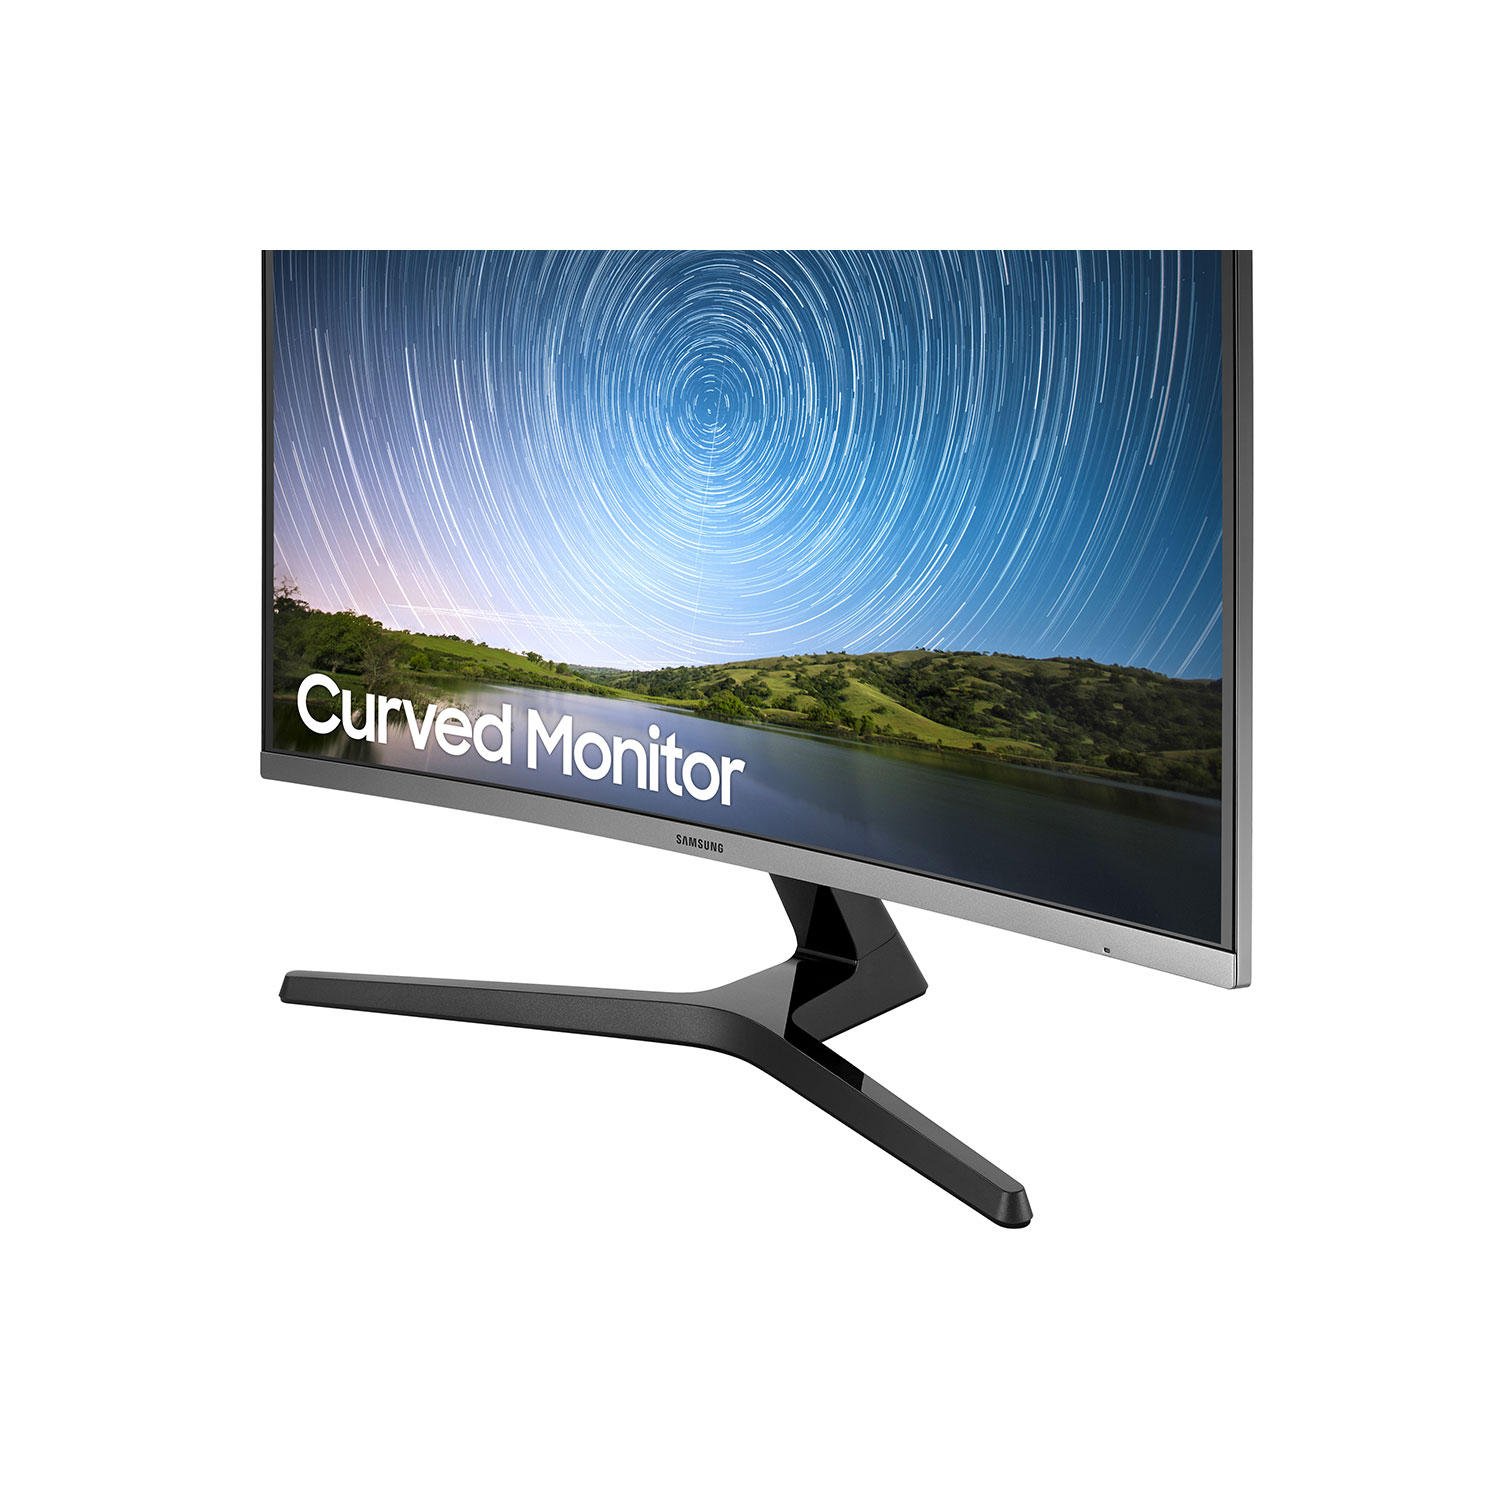 Samsung 32" Class CR50 Curved Full HD Monitor - 75Hz Refresh - 4ms Response Time - Sam's Club  199.96